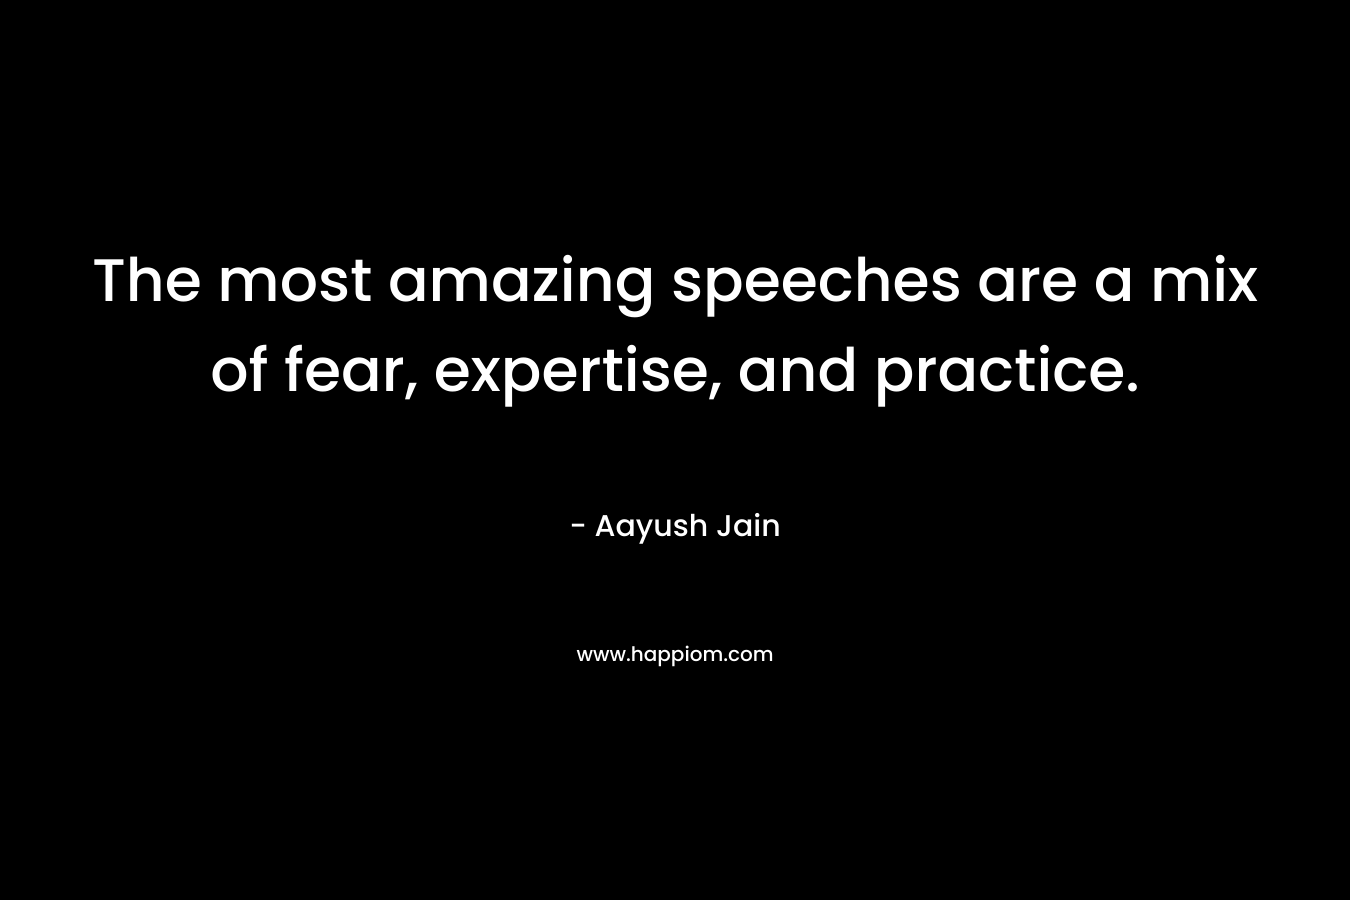 The most amazing speeches are a mix of fear, expertise, and practice.